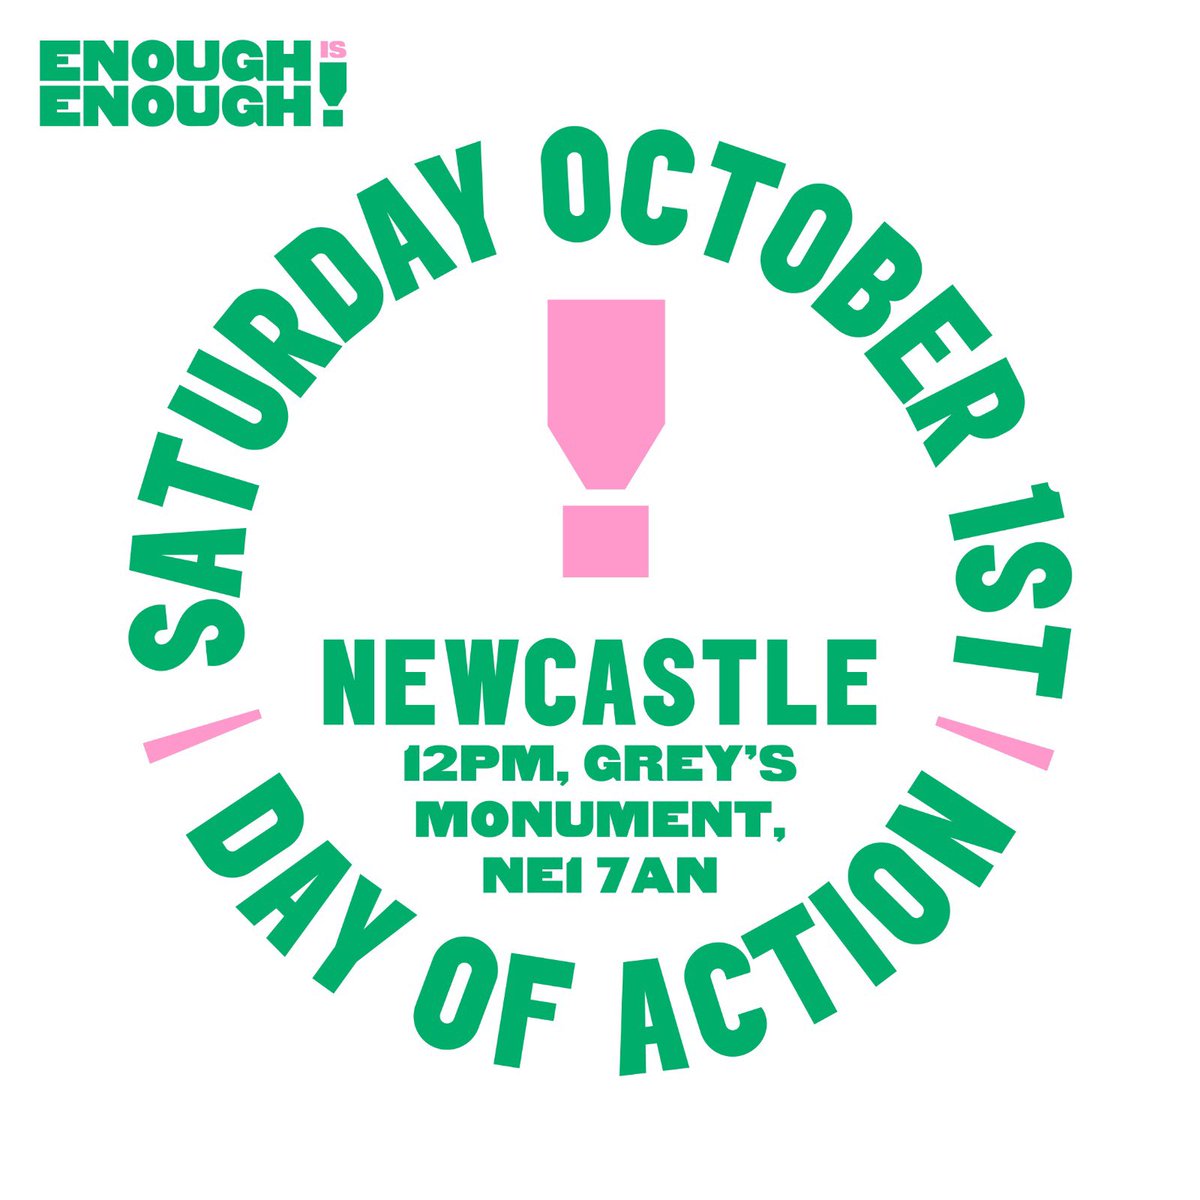 🚨Today is the day 🚨Join us at 12pm at Grey’s Monument as we come together as a city to say #EnoughIsEnough with speeches from Si King of @HairyBikers, @IanLaveryMP, @MayorJD as well as speakers from @nufcfoodbank @ACORN_Newcastle @RMTunion @CWUnews and more! @eiecampaign 💪